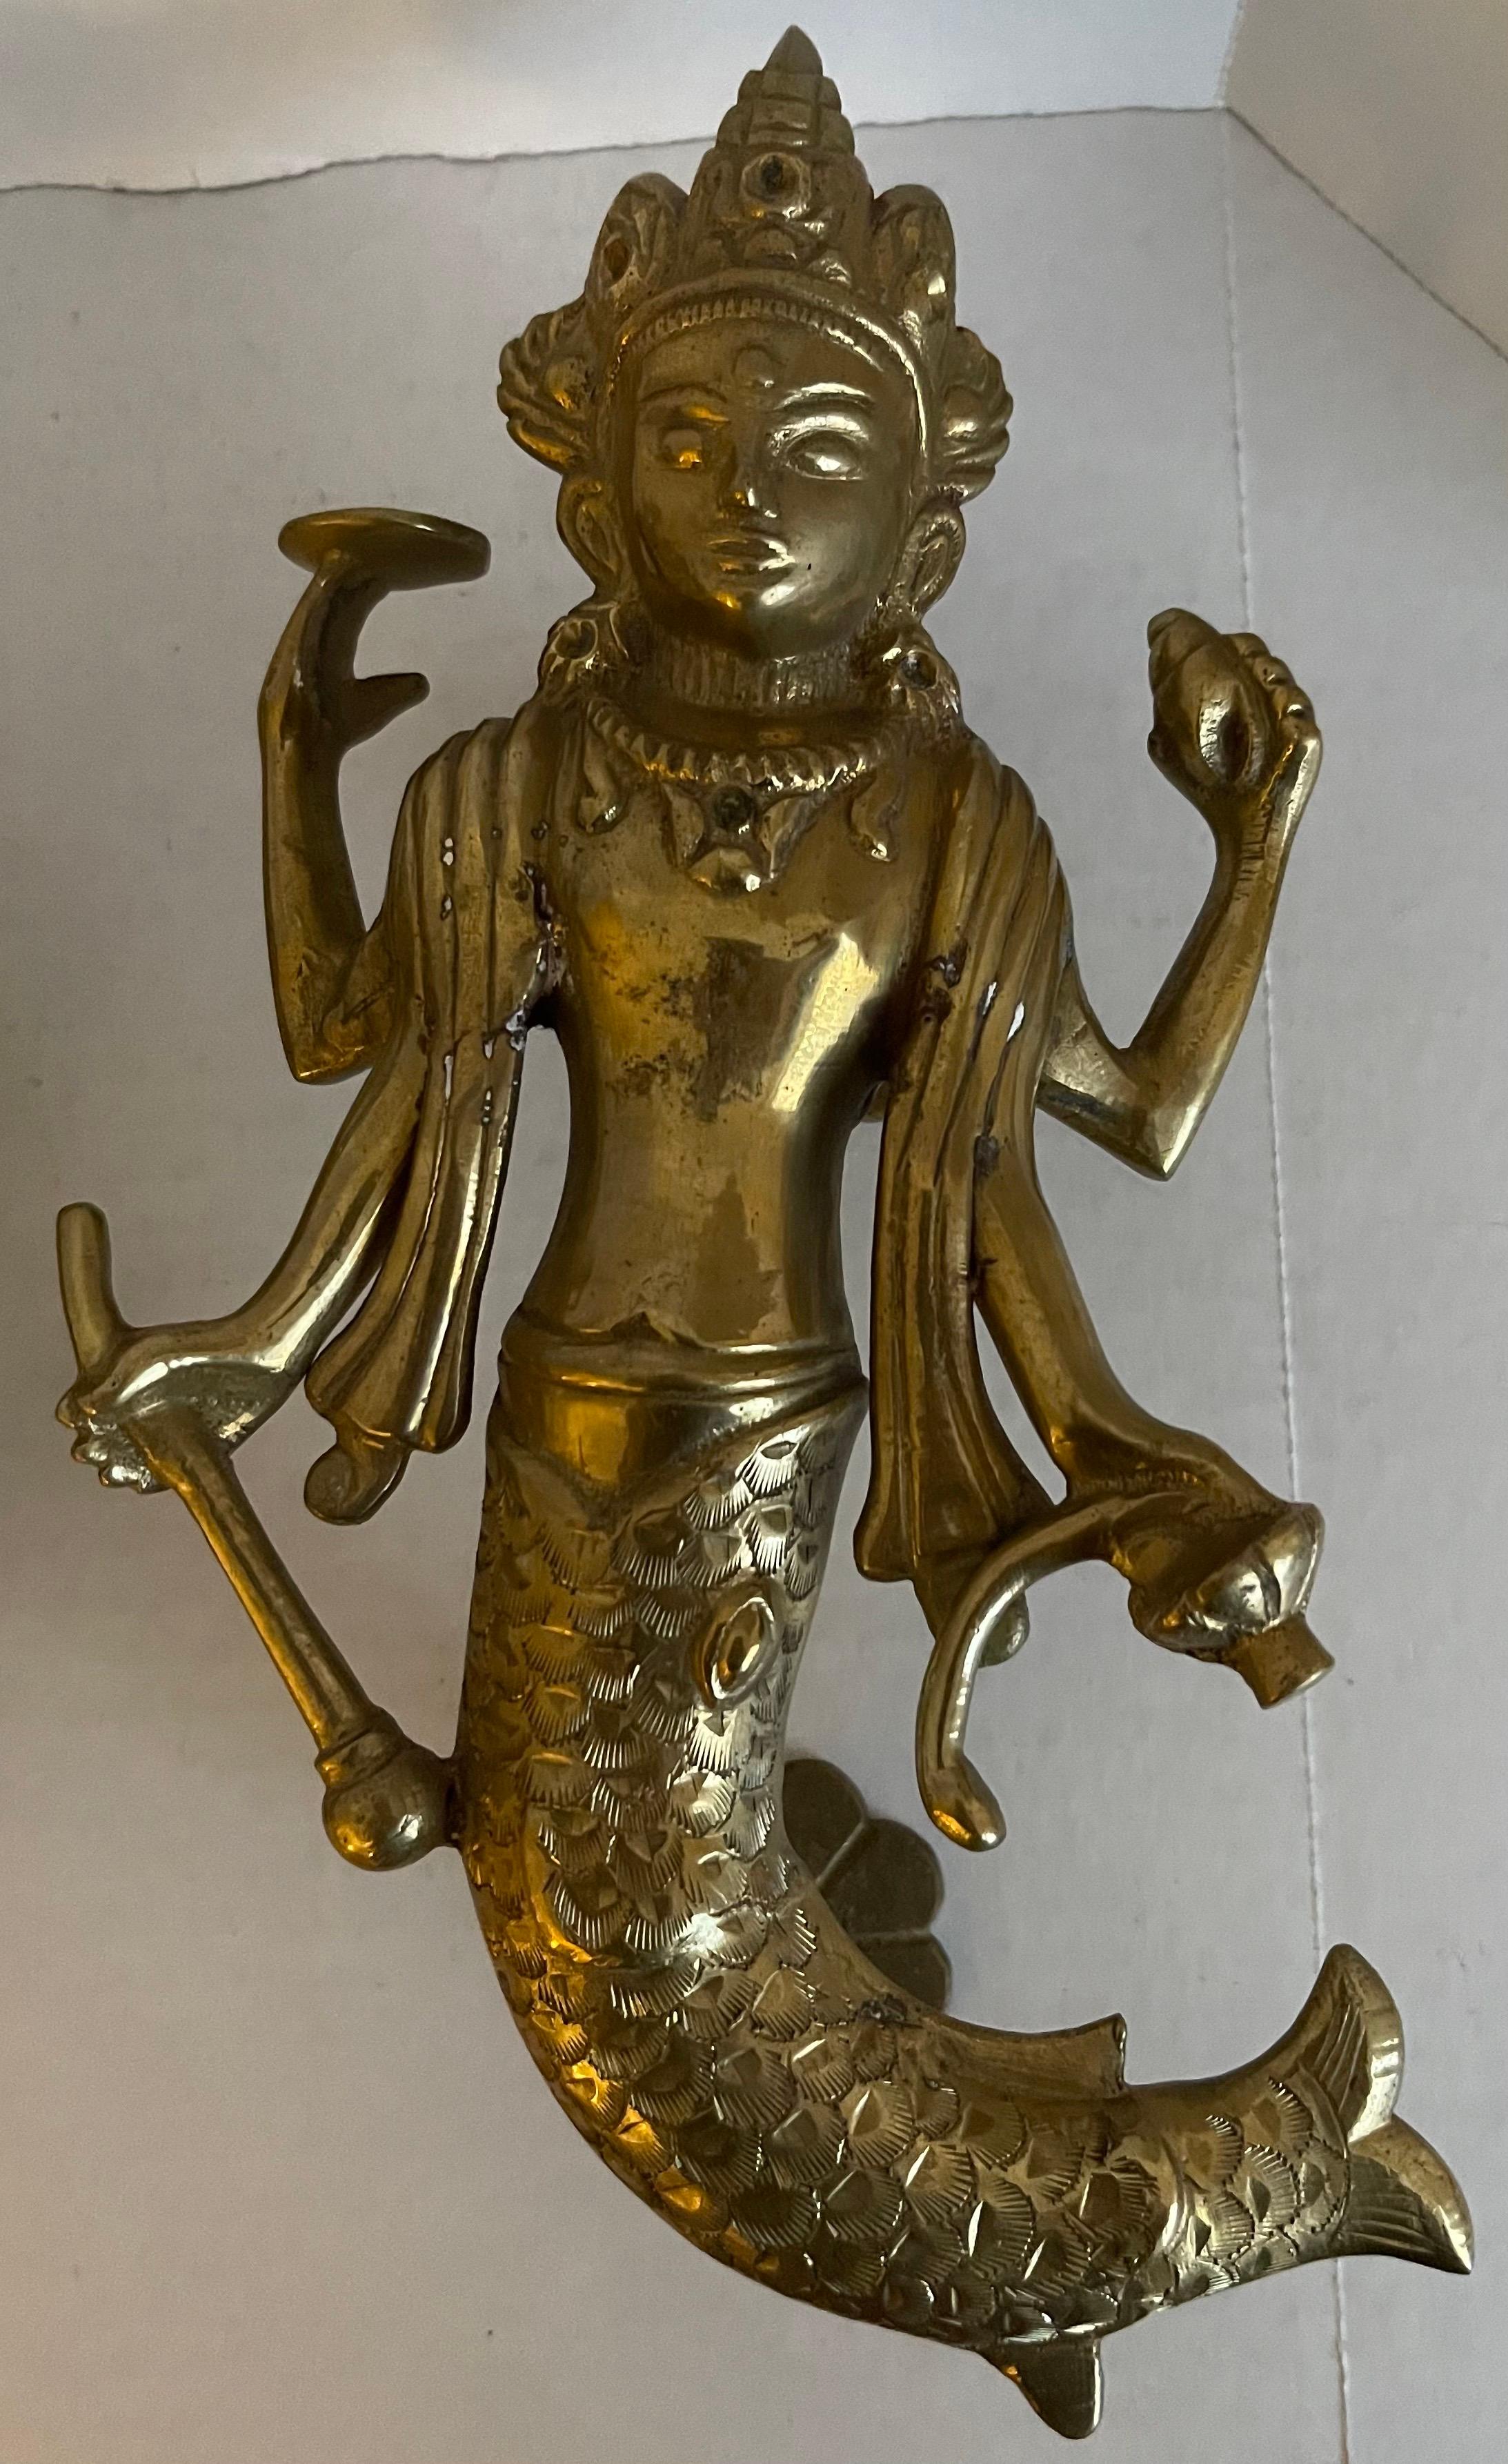 Pair of solid brass Asian goddess door knobs. No makers mark. Mounting hardware not included.